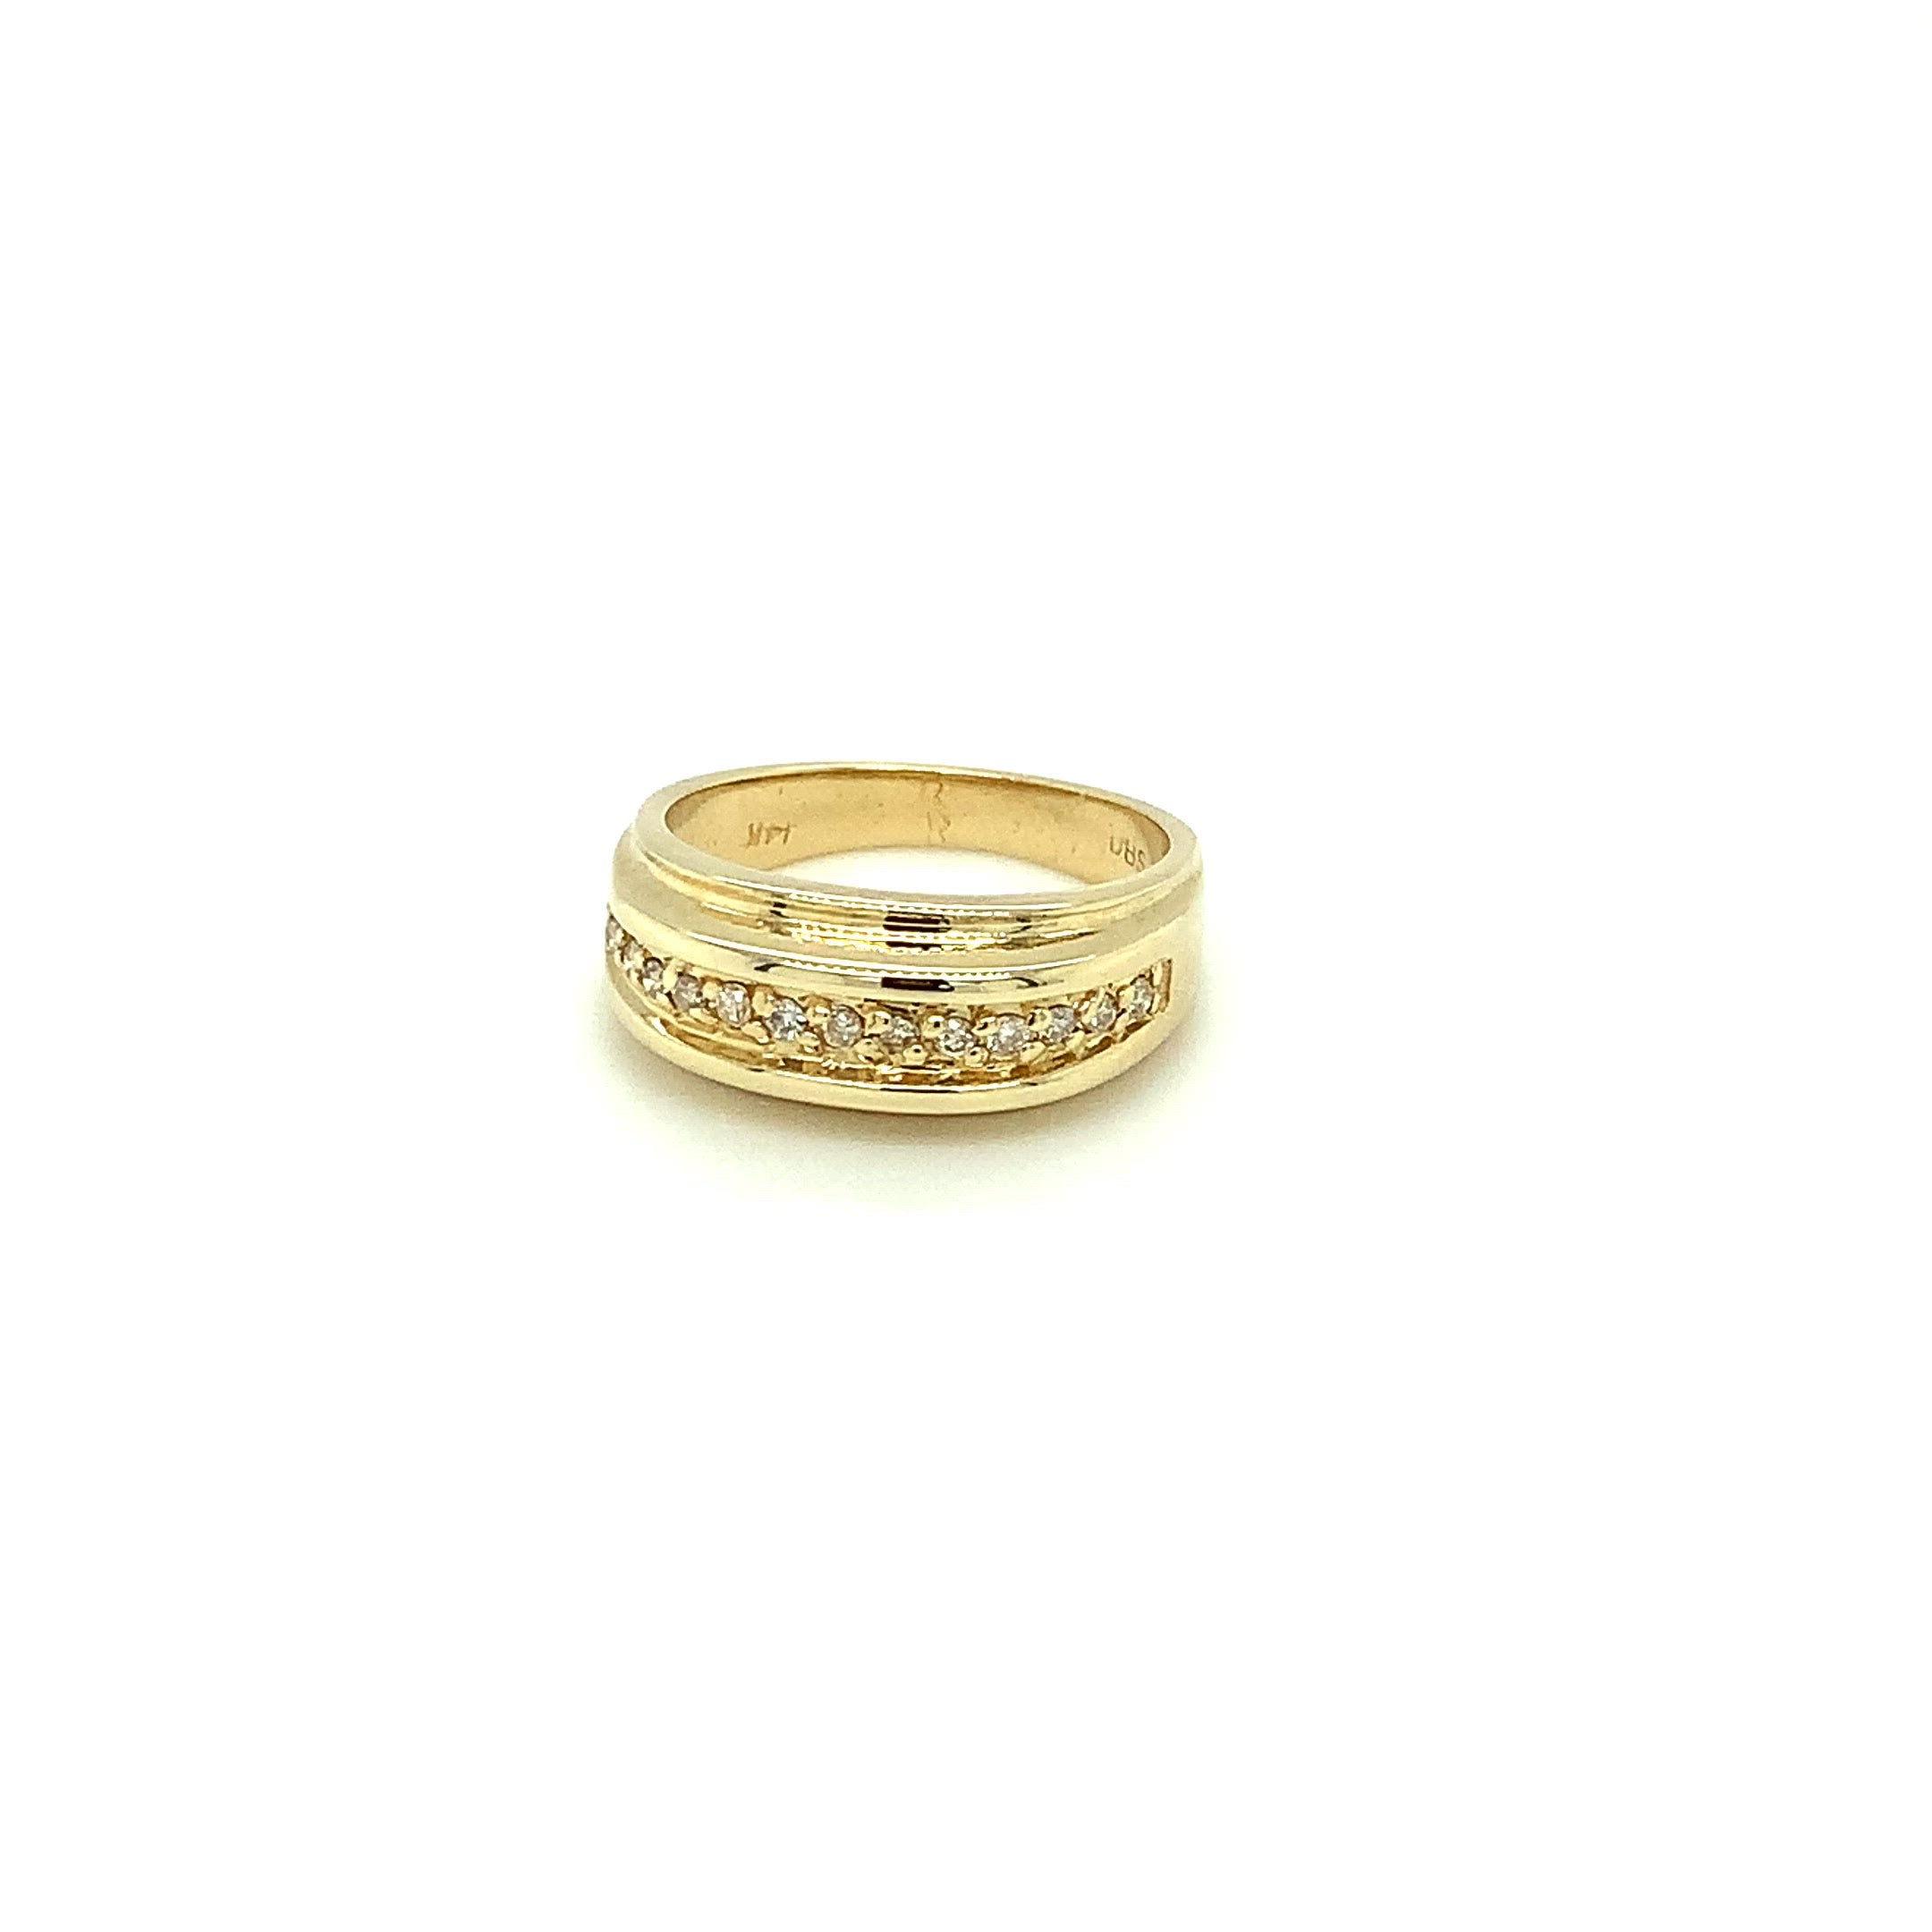 Natural Diamond Ring 14K Solid Gold .20tcw Band Ring Statement Ring Stackable Ring Ladies Ring Women's Ring Vintage Ring Estate Jewellery